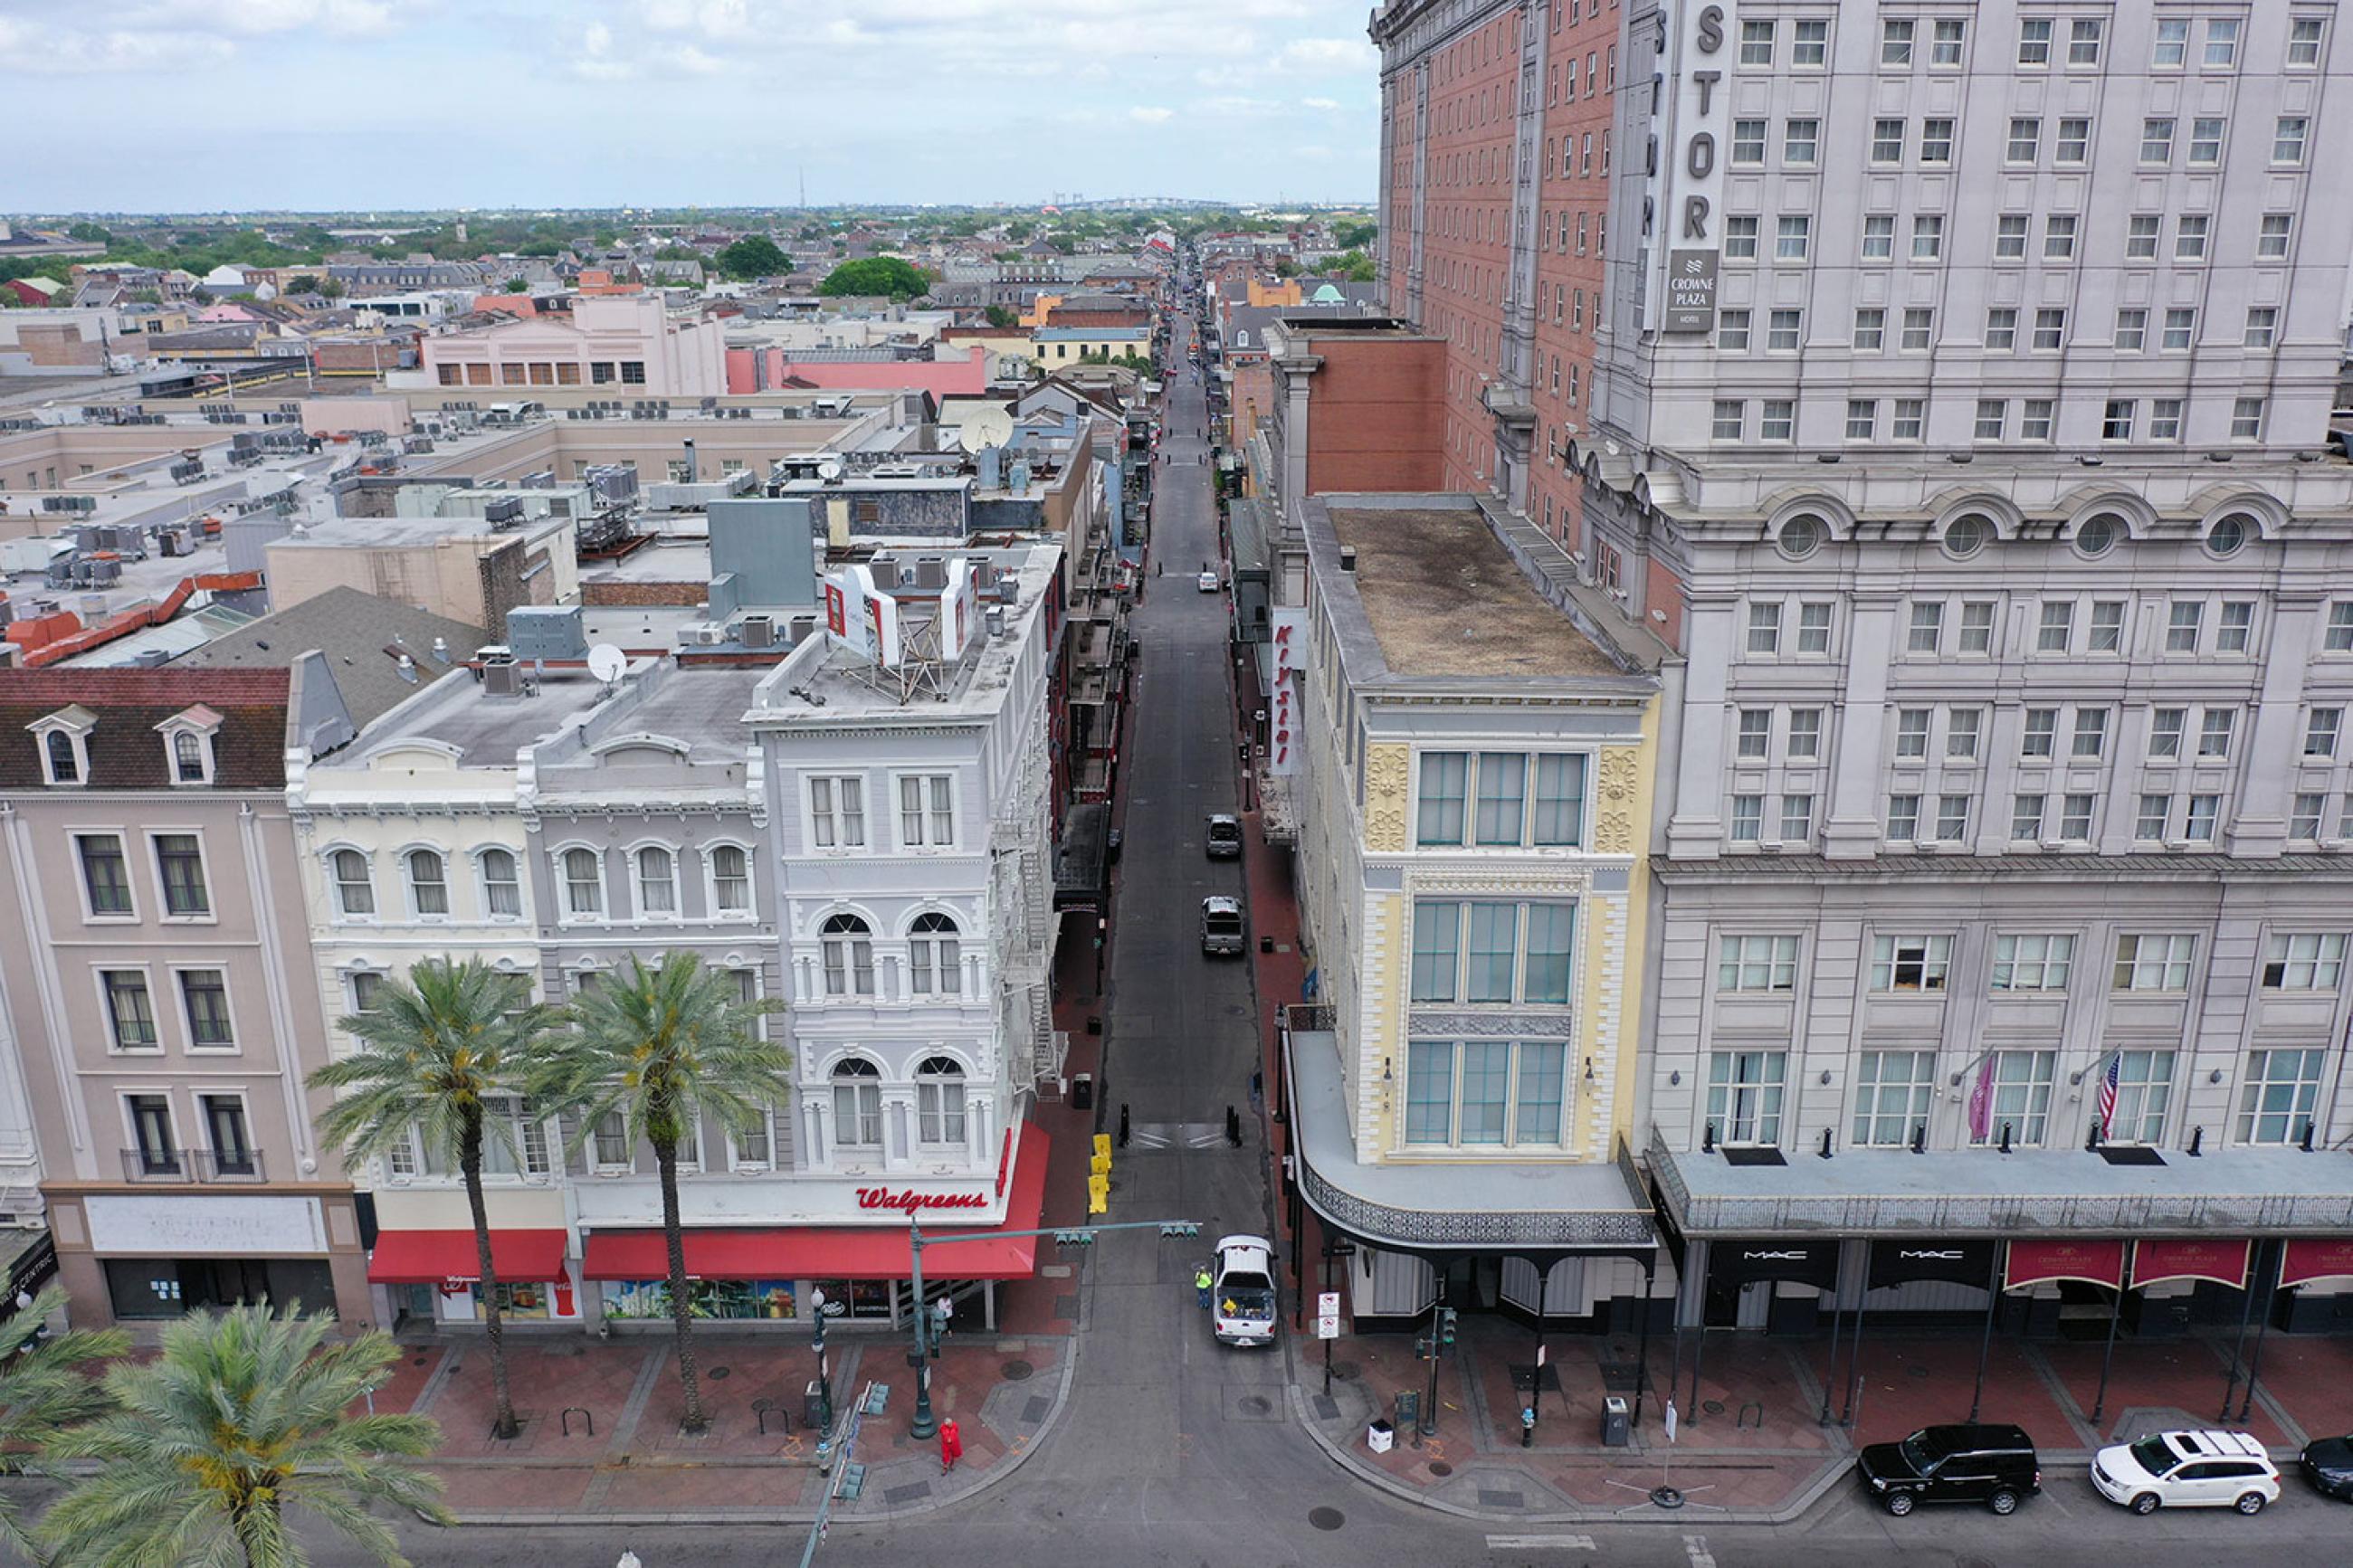 Normally bustling tourist mecca Bourbon Street lies deserted in the early afternoon during shelter in place orders to slow the spread of coronavirus in a photograph of New Orleans on March 27, 2020. The photo shows a view of the entrance to Bourbon street, which would normally be packed with tourists and other people, almost completely empty. REUTERS/Drone Base